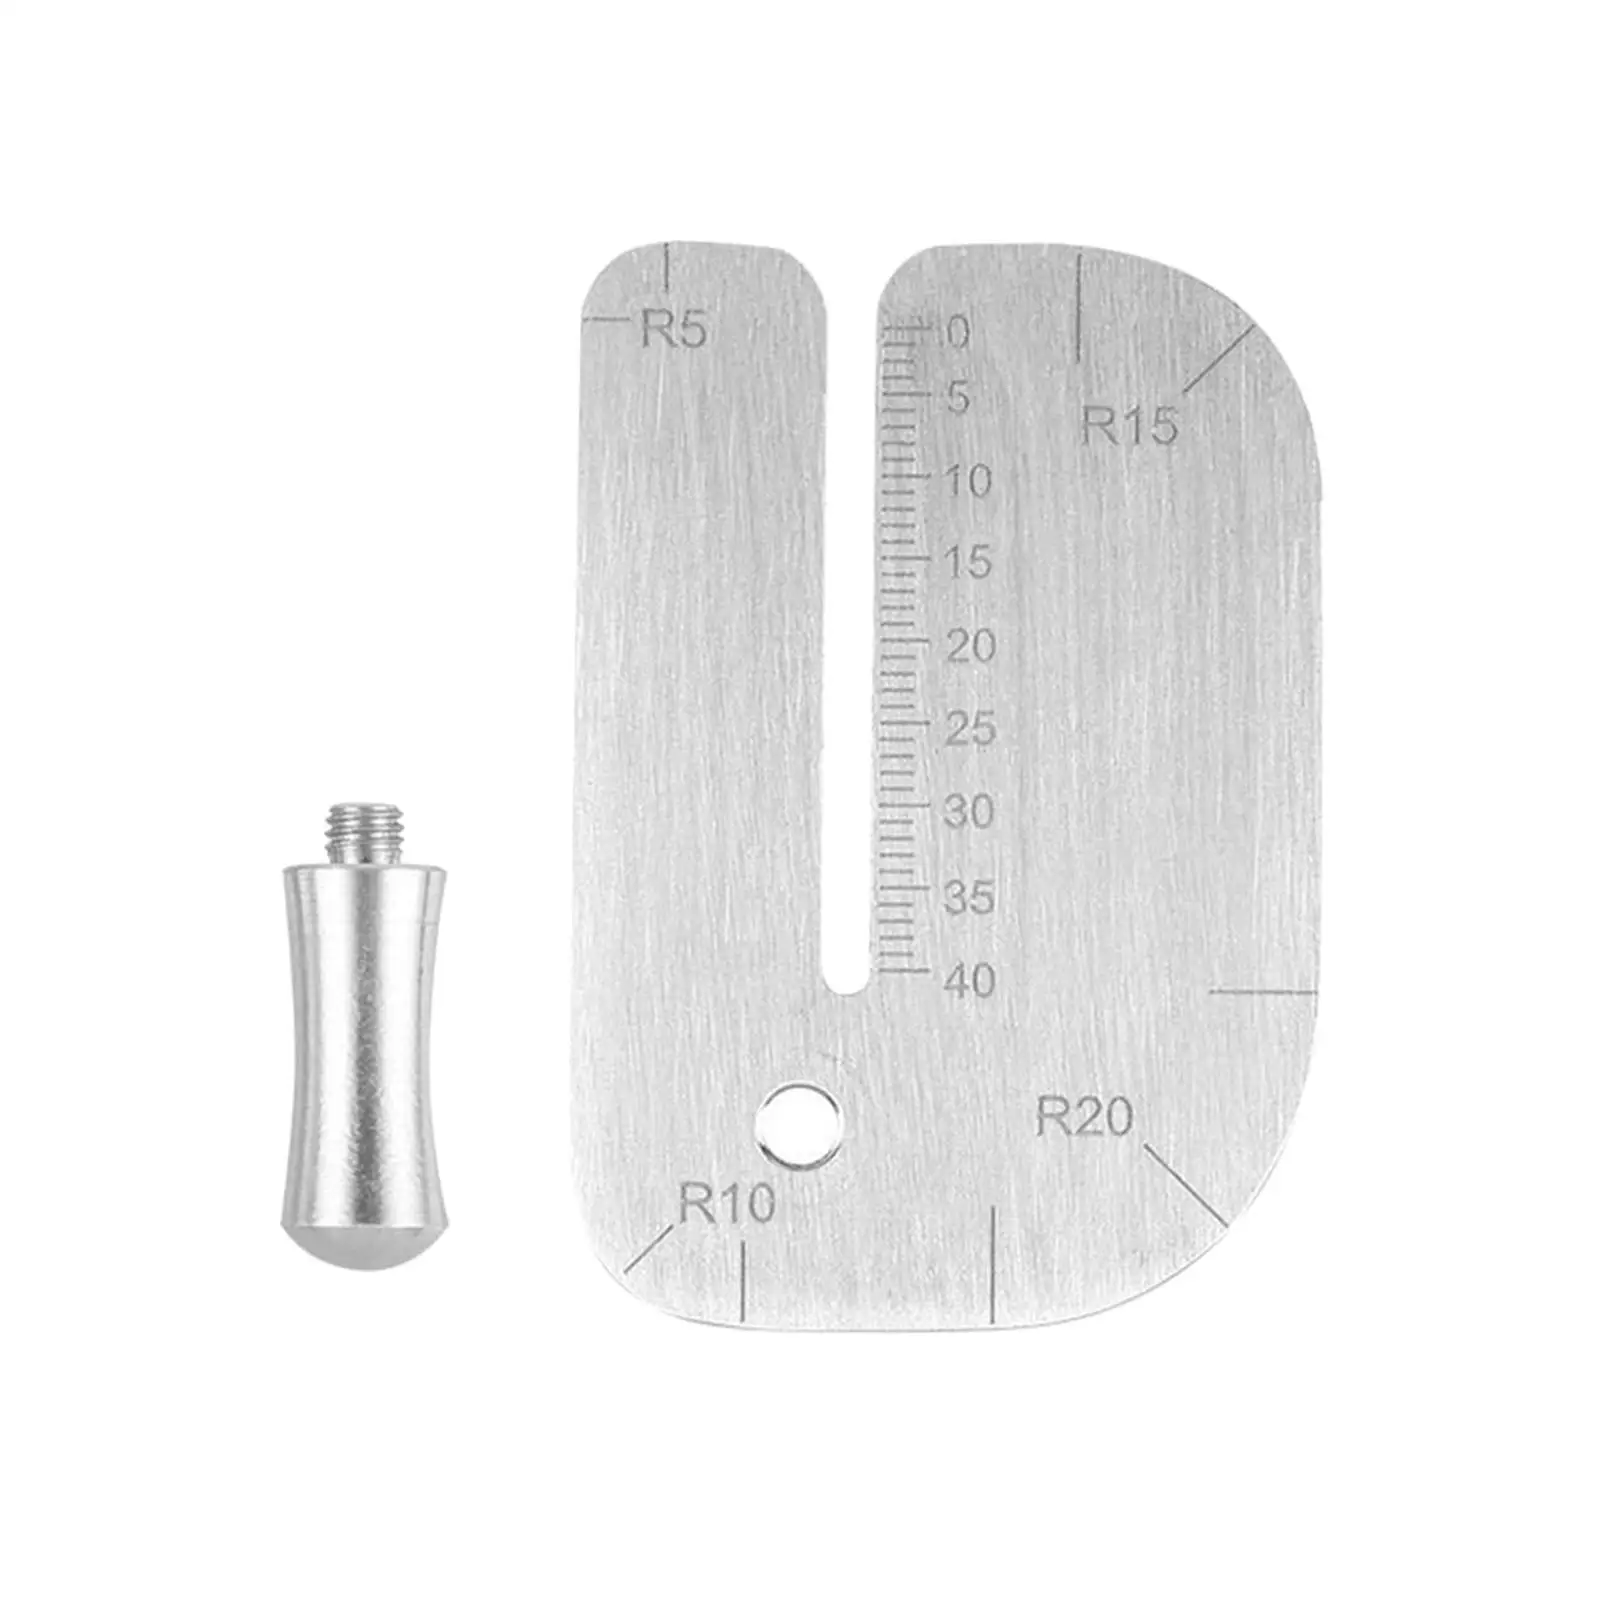 Leather s Pulling Board Punch Template Durable Accs Leather Stitching